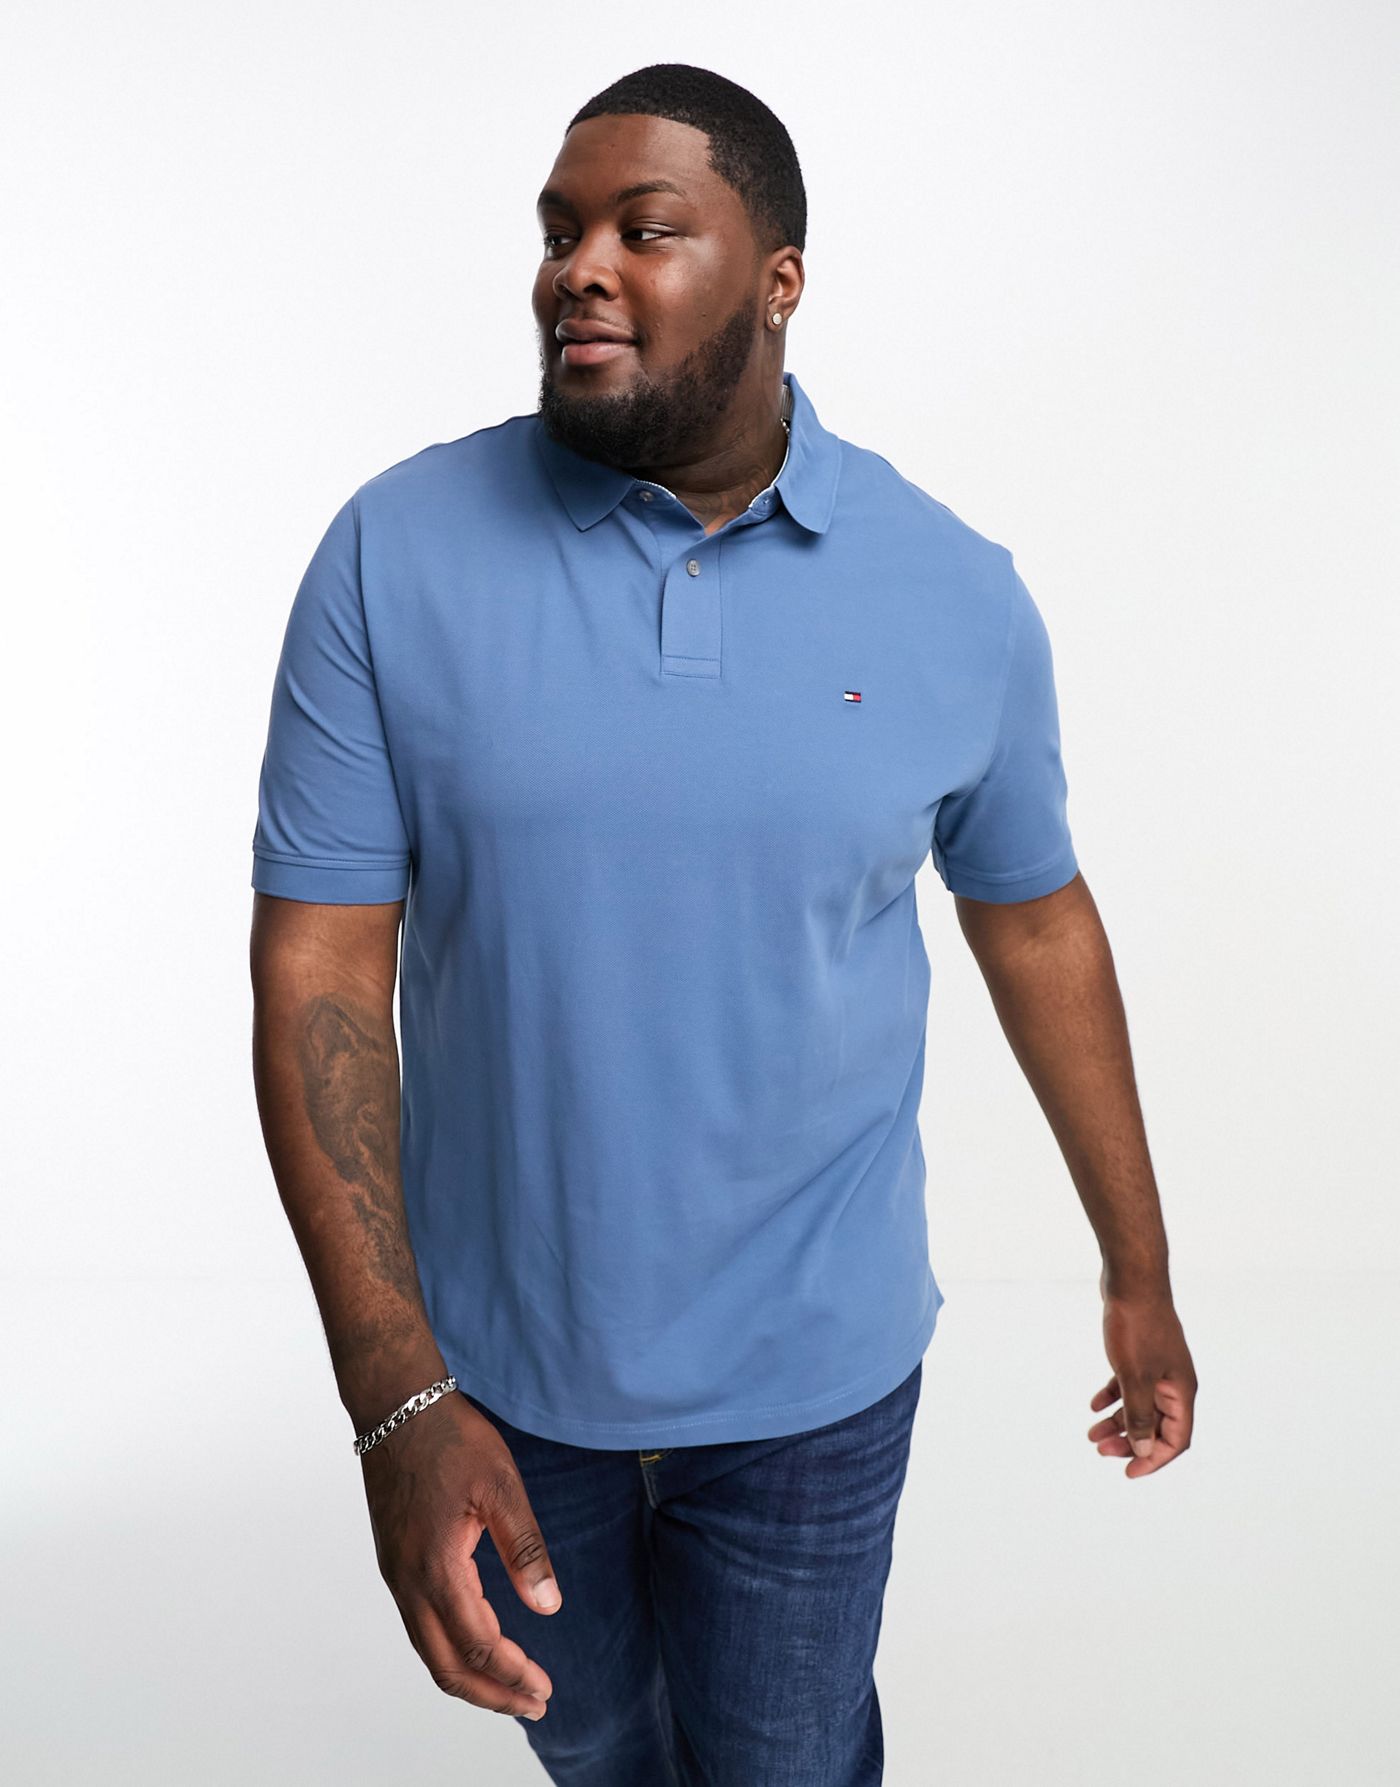 Tommy Hilfiger Big & Tall regular fit polo top in light blue